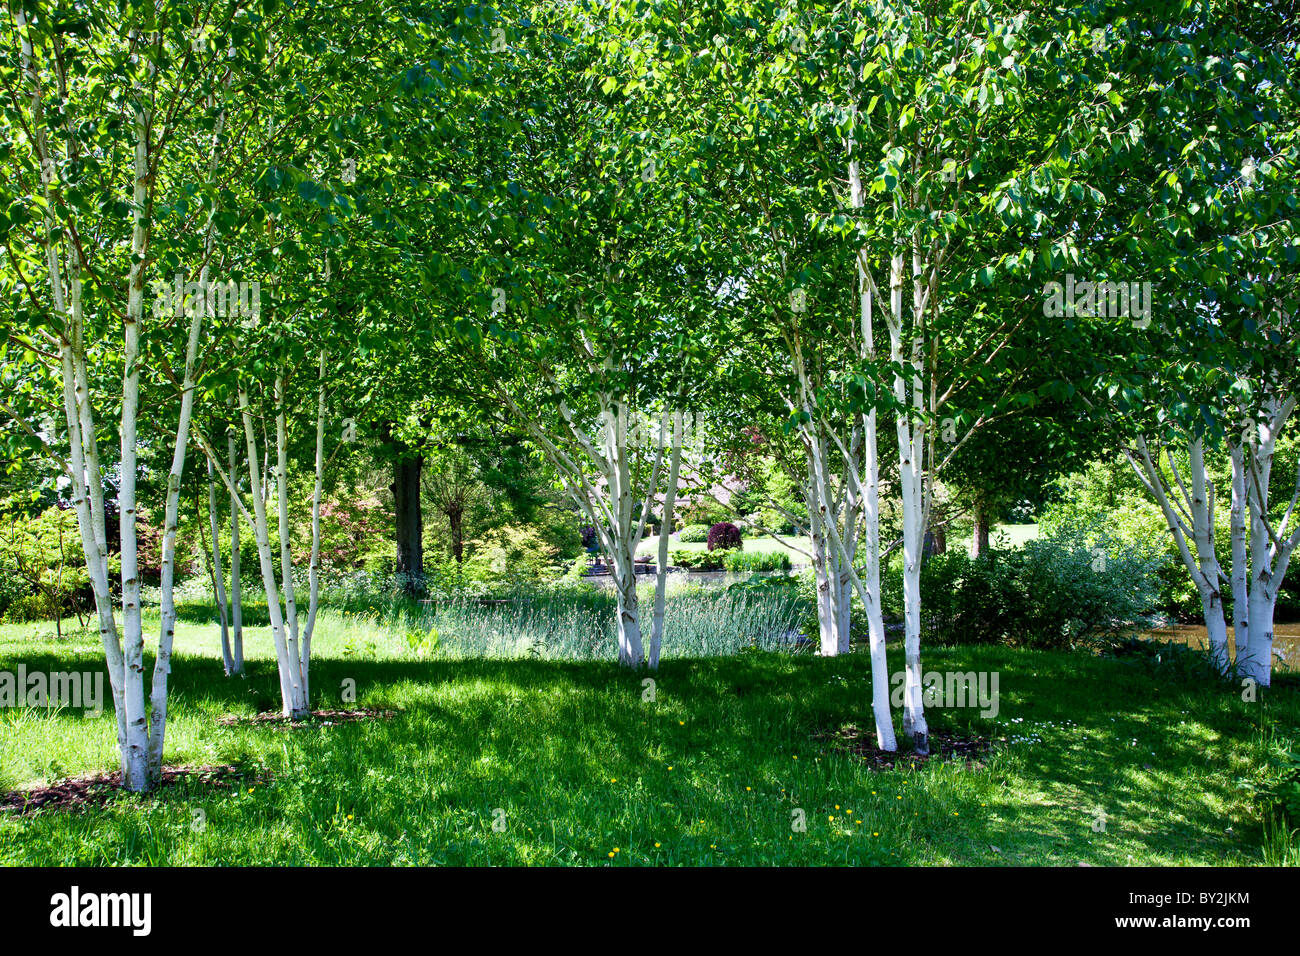 A small shady copse of silver birch trees in an English country garden in summer Stock Photo